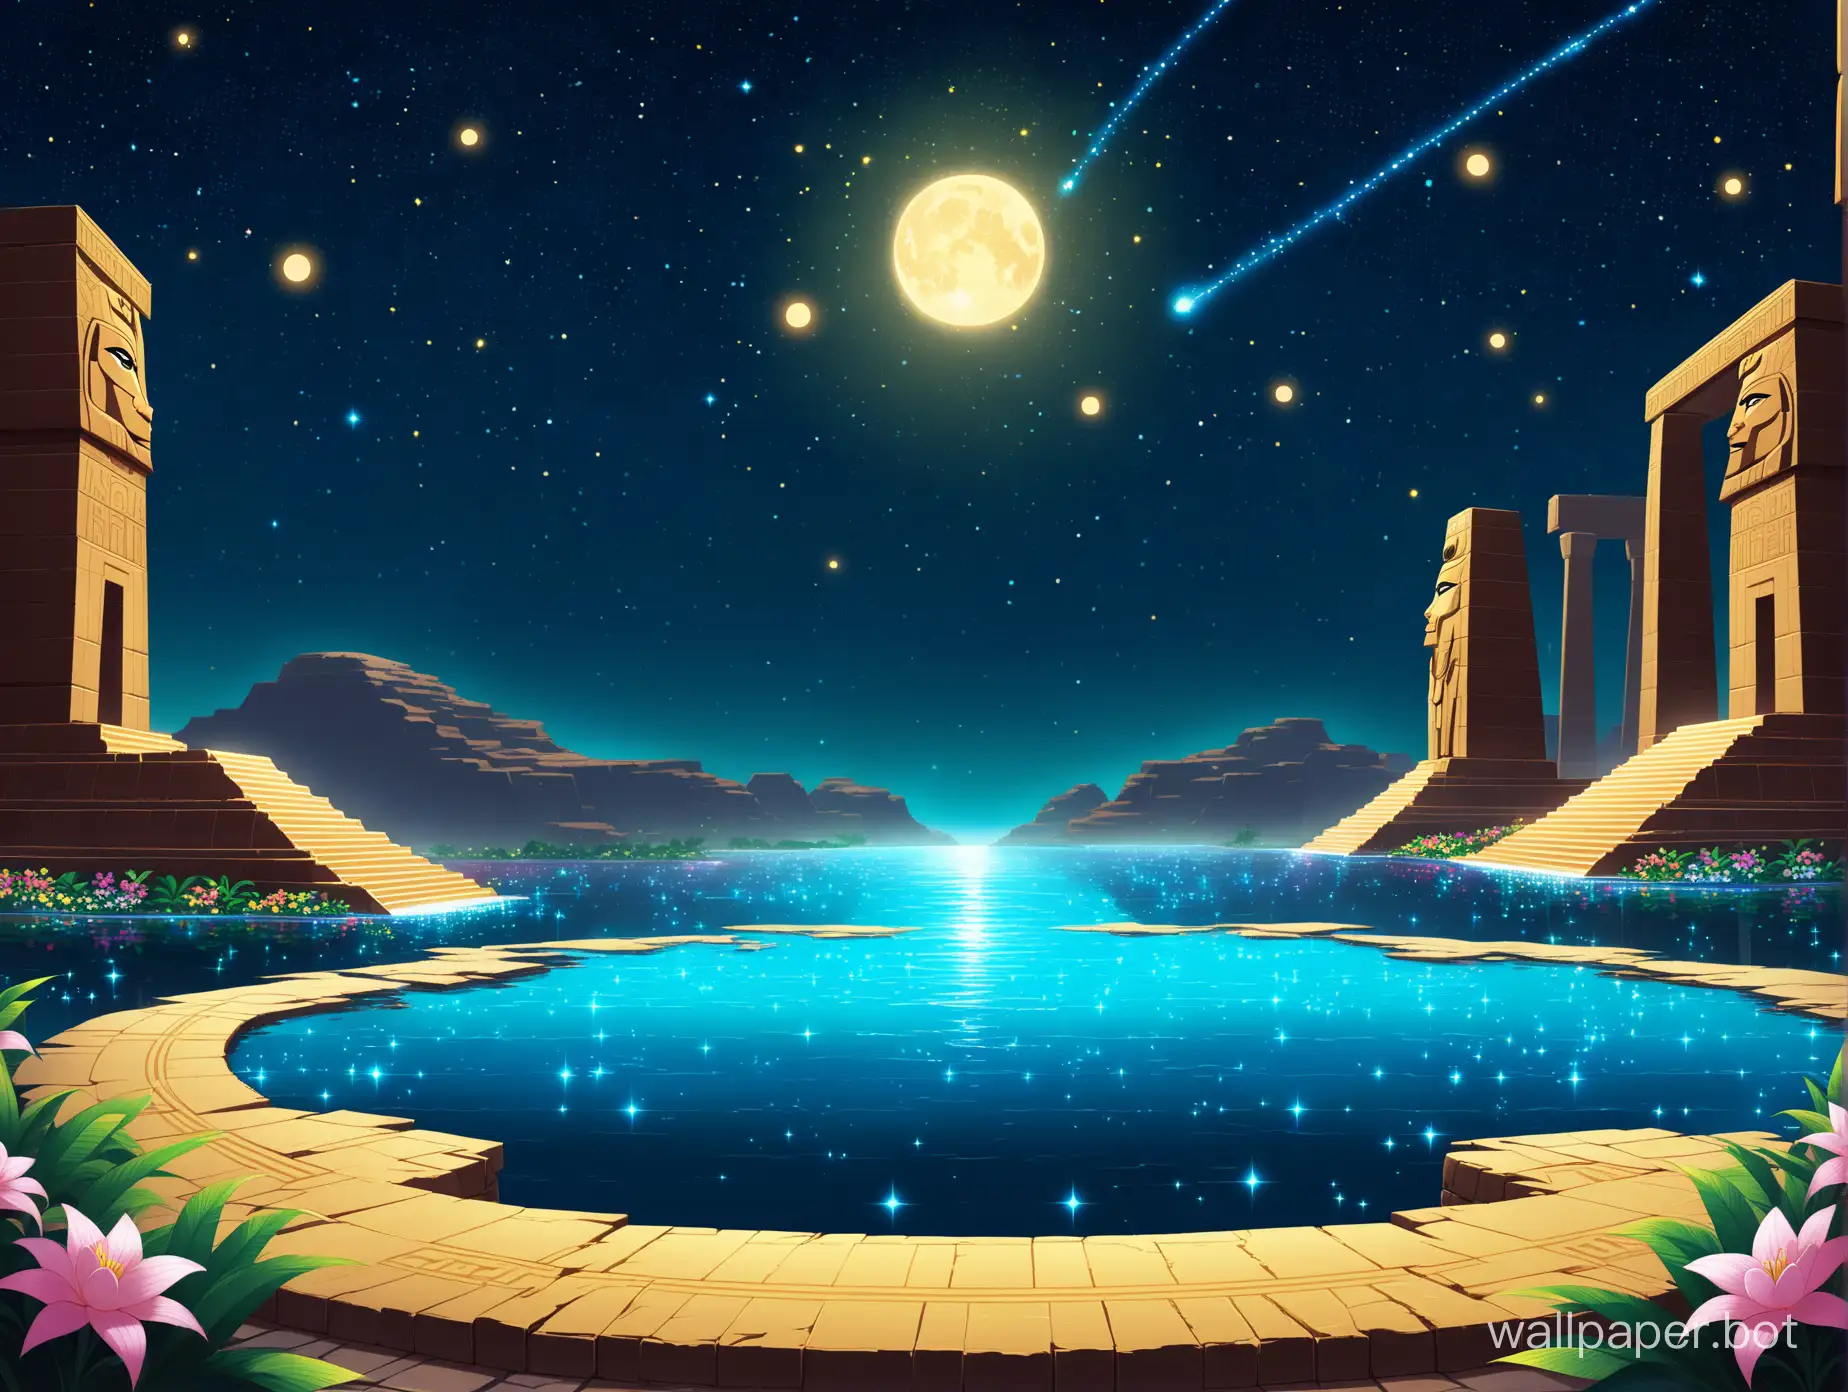 fighting game stage, floor level, mystic battleplain of the gods, karkat at night, ancient giant egypt ruins under a constellation sky with the floor slowly bathed by the nile waters and flowers